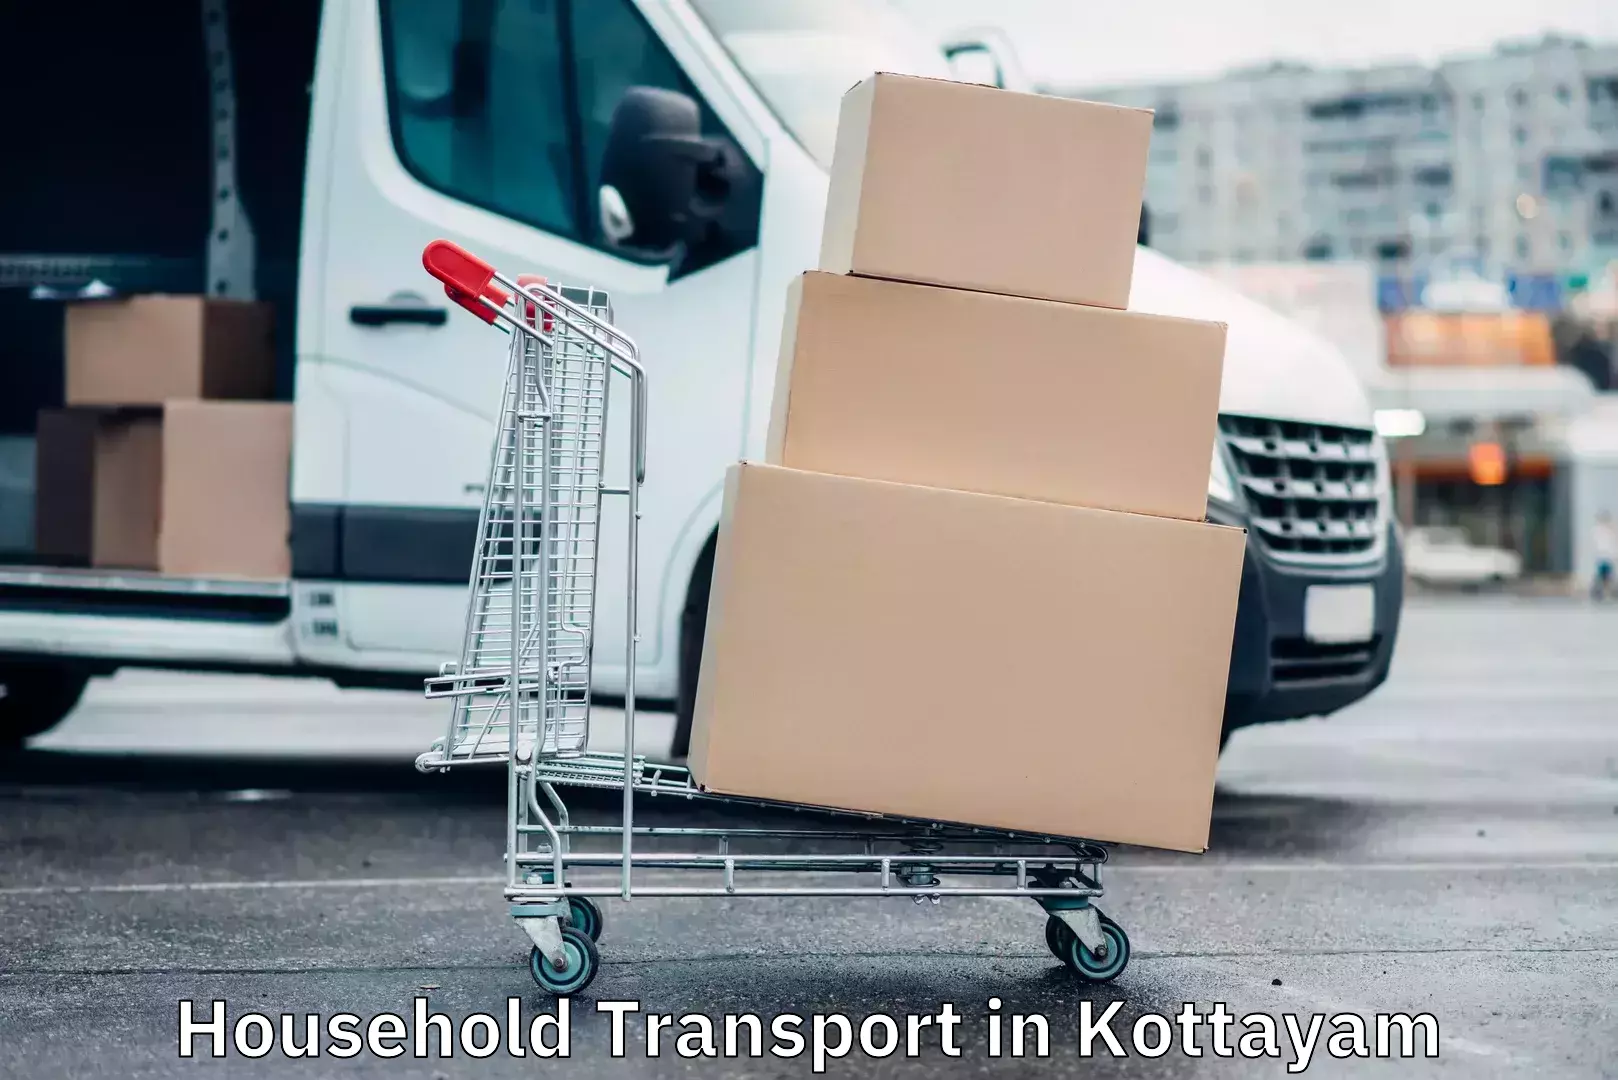 Furniture delivery service in Kottayam